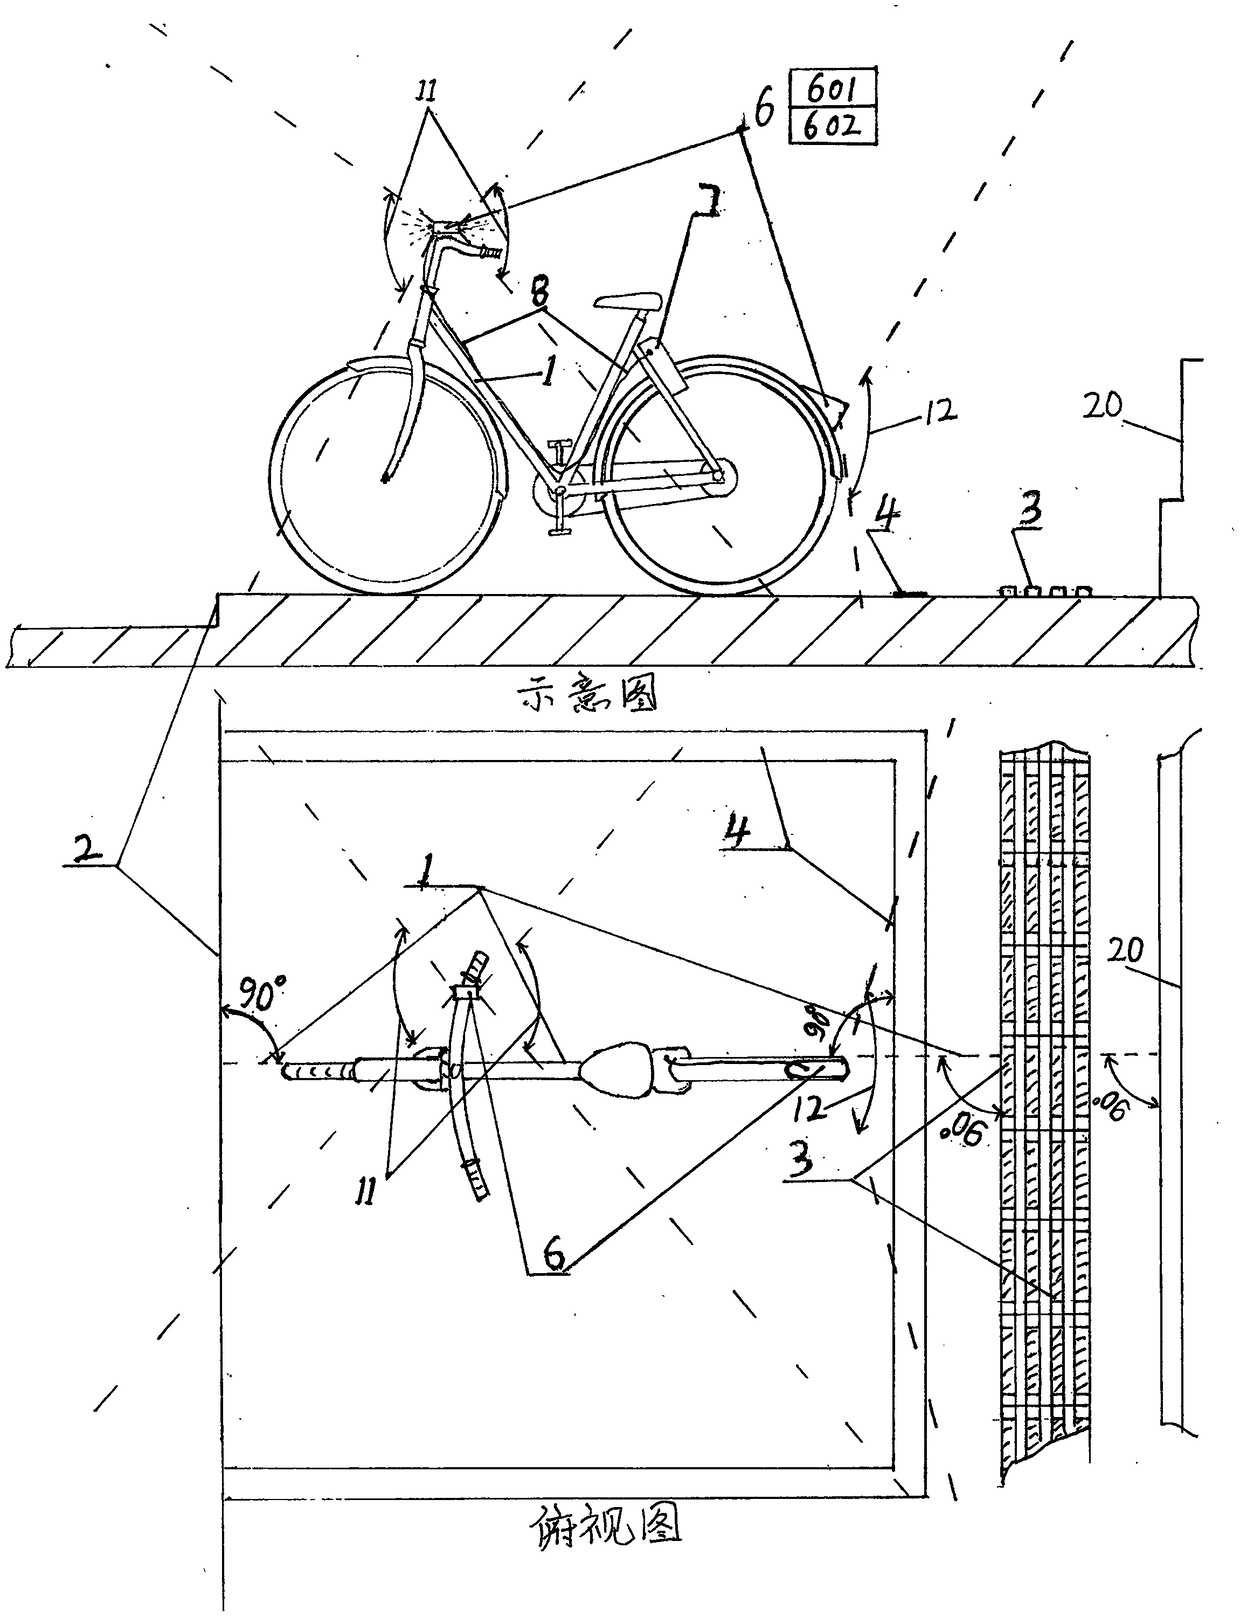 Bicycle with detection and identification equipment, and management system of intelligent identification and parking environment